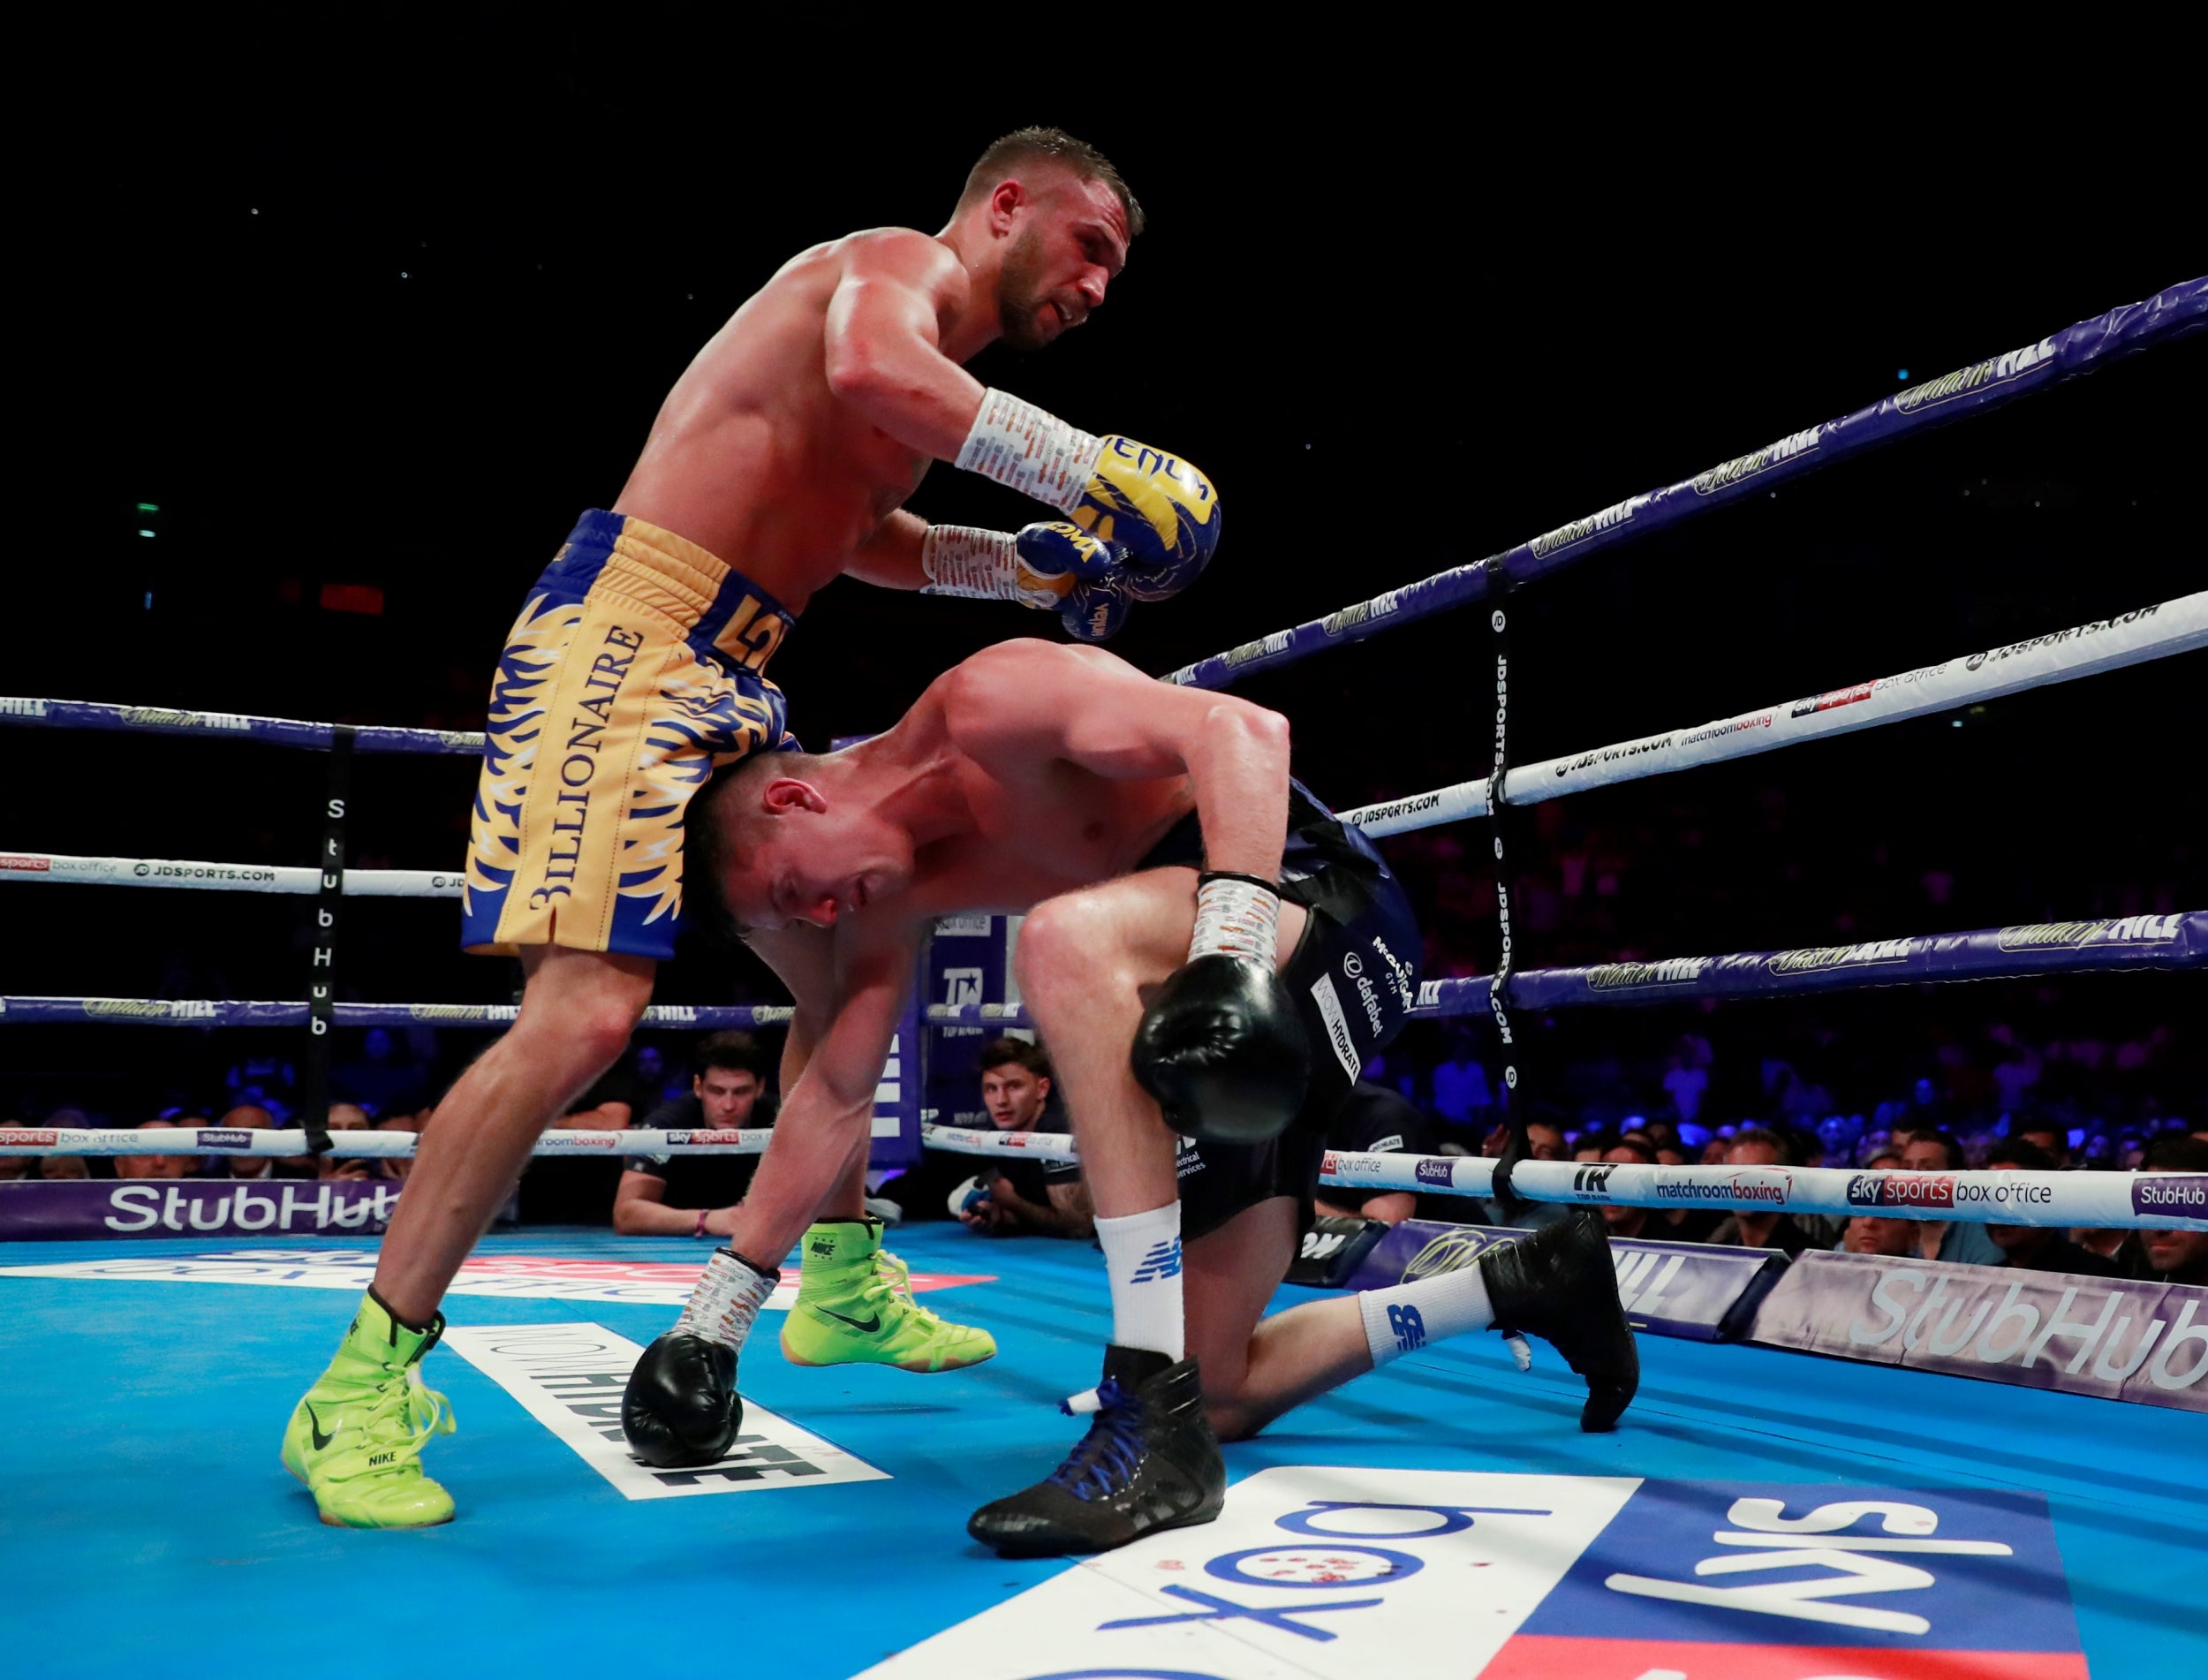 Campbell's 11th-round trip to the canvas put the cherry on the cake for Lomachenko (Reuters)